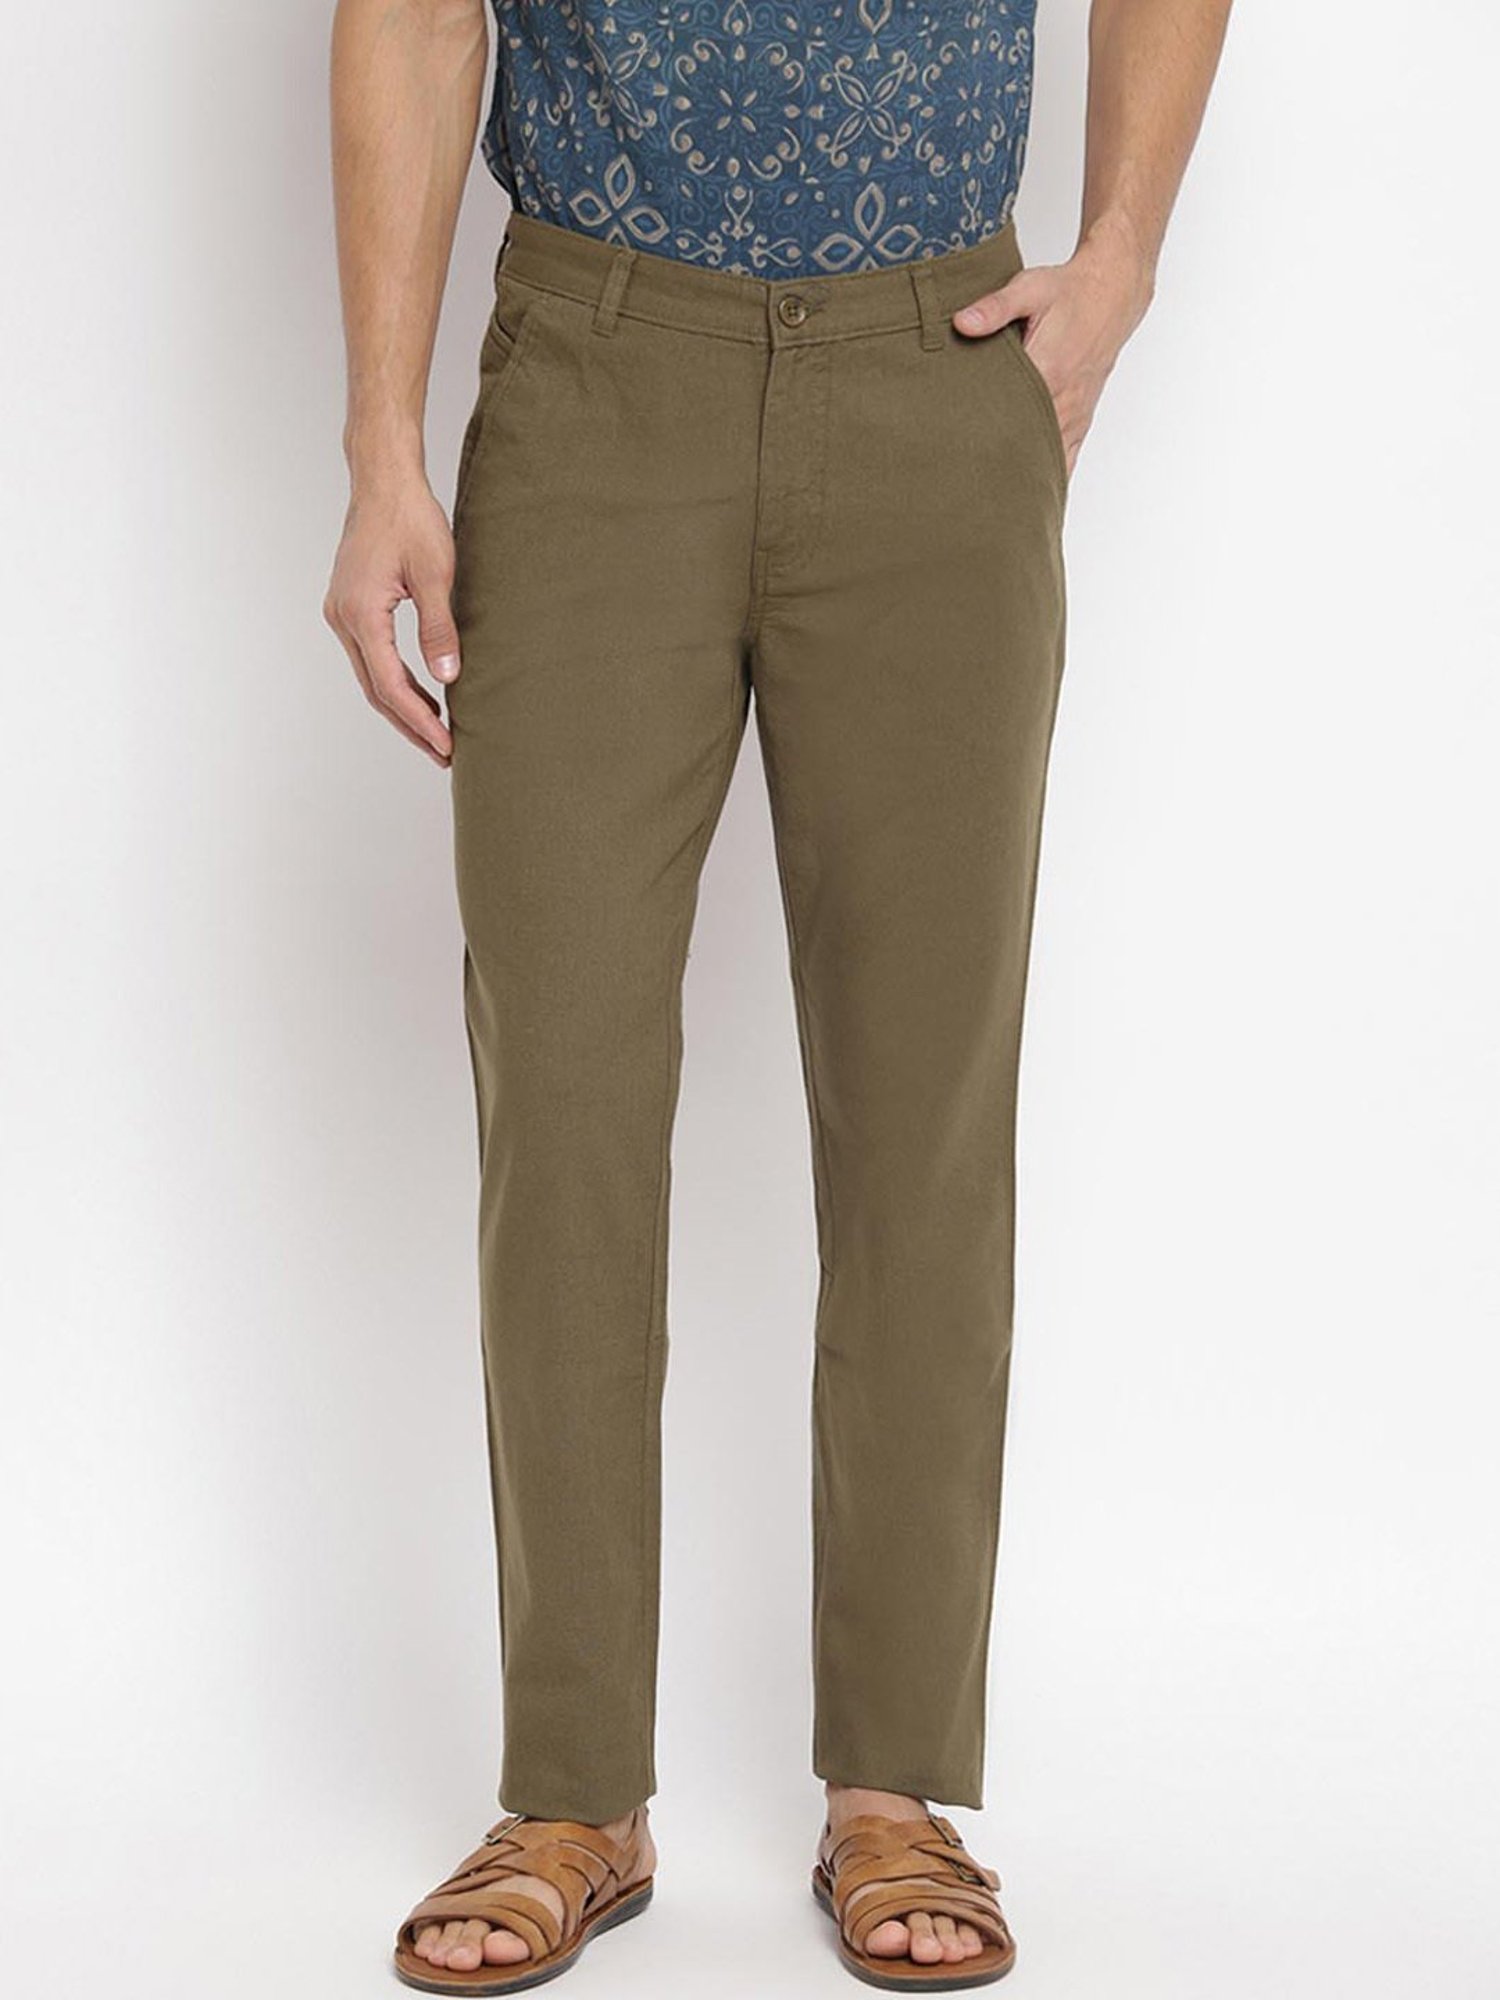 Dockers Mens Relaxed Fit Easy Khaki Pants Pleated  lupongovph